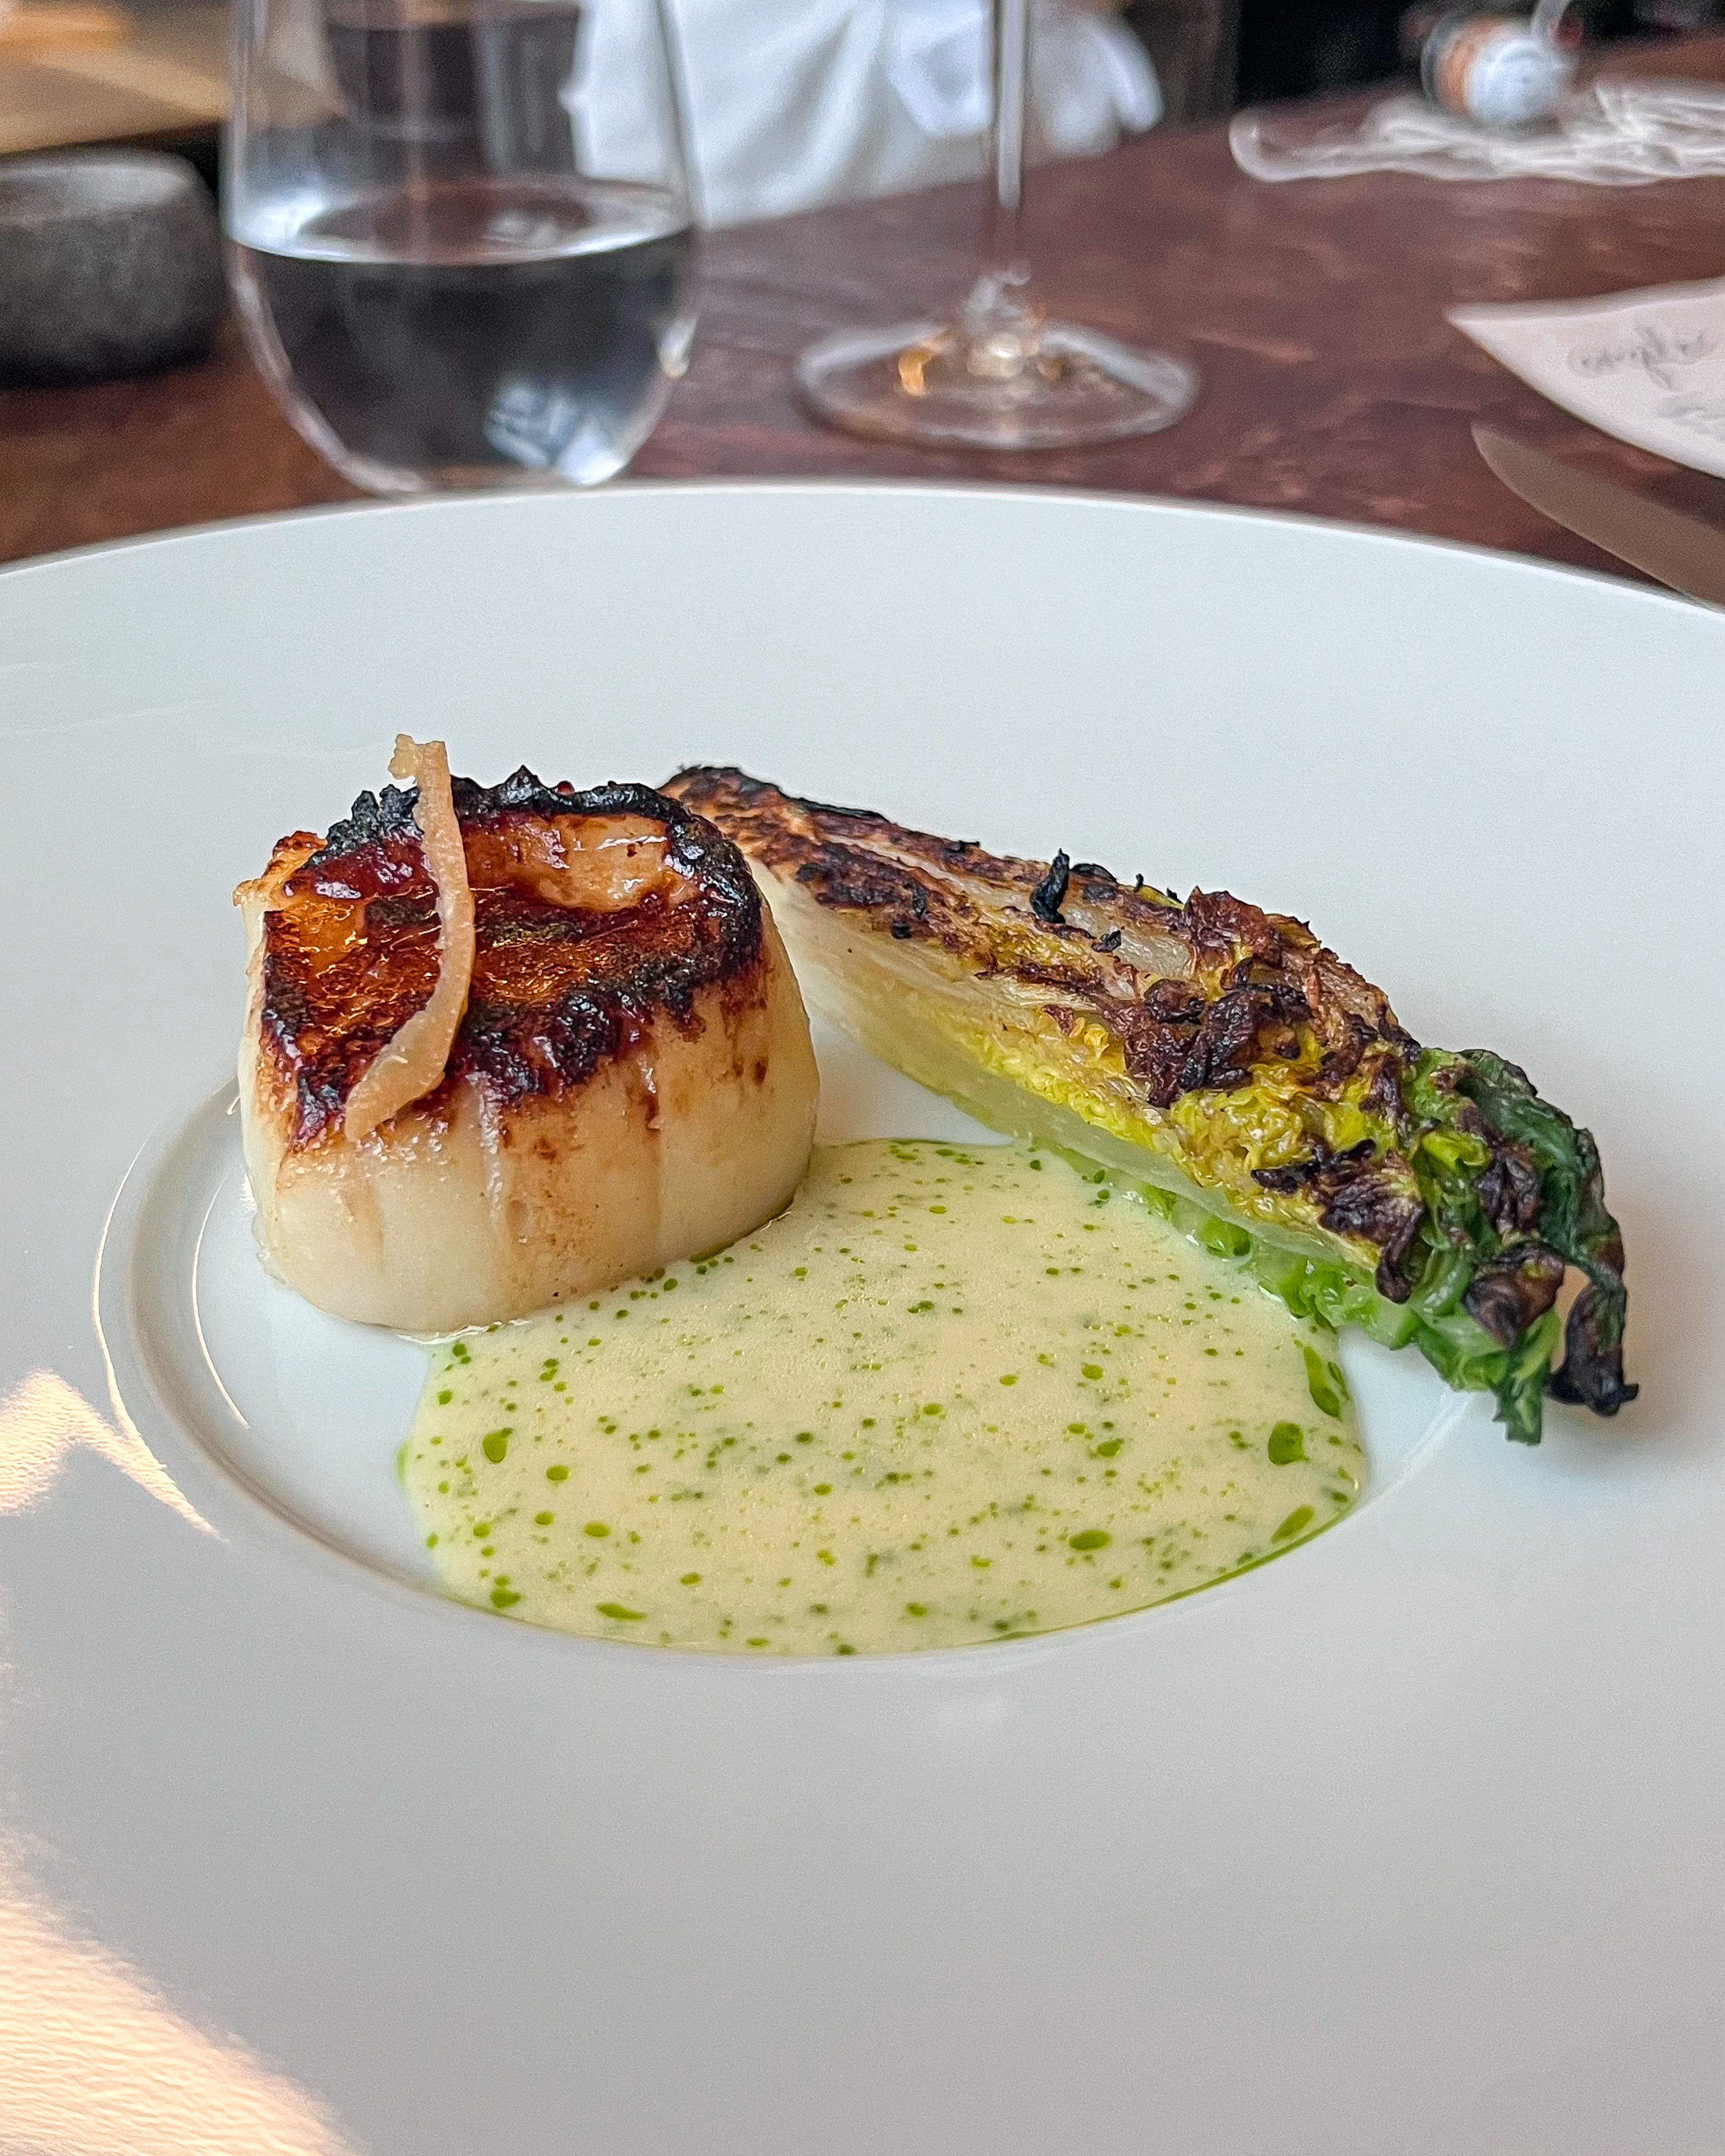 Scallop dish from the Avery x Argile collab